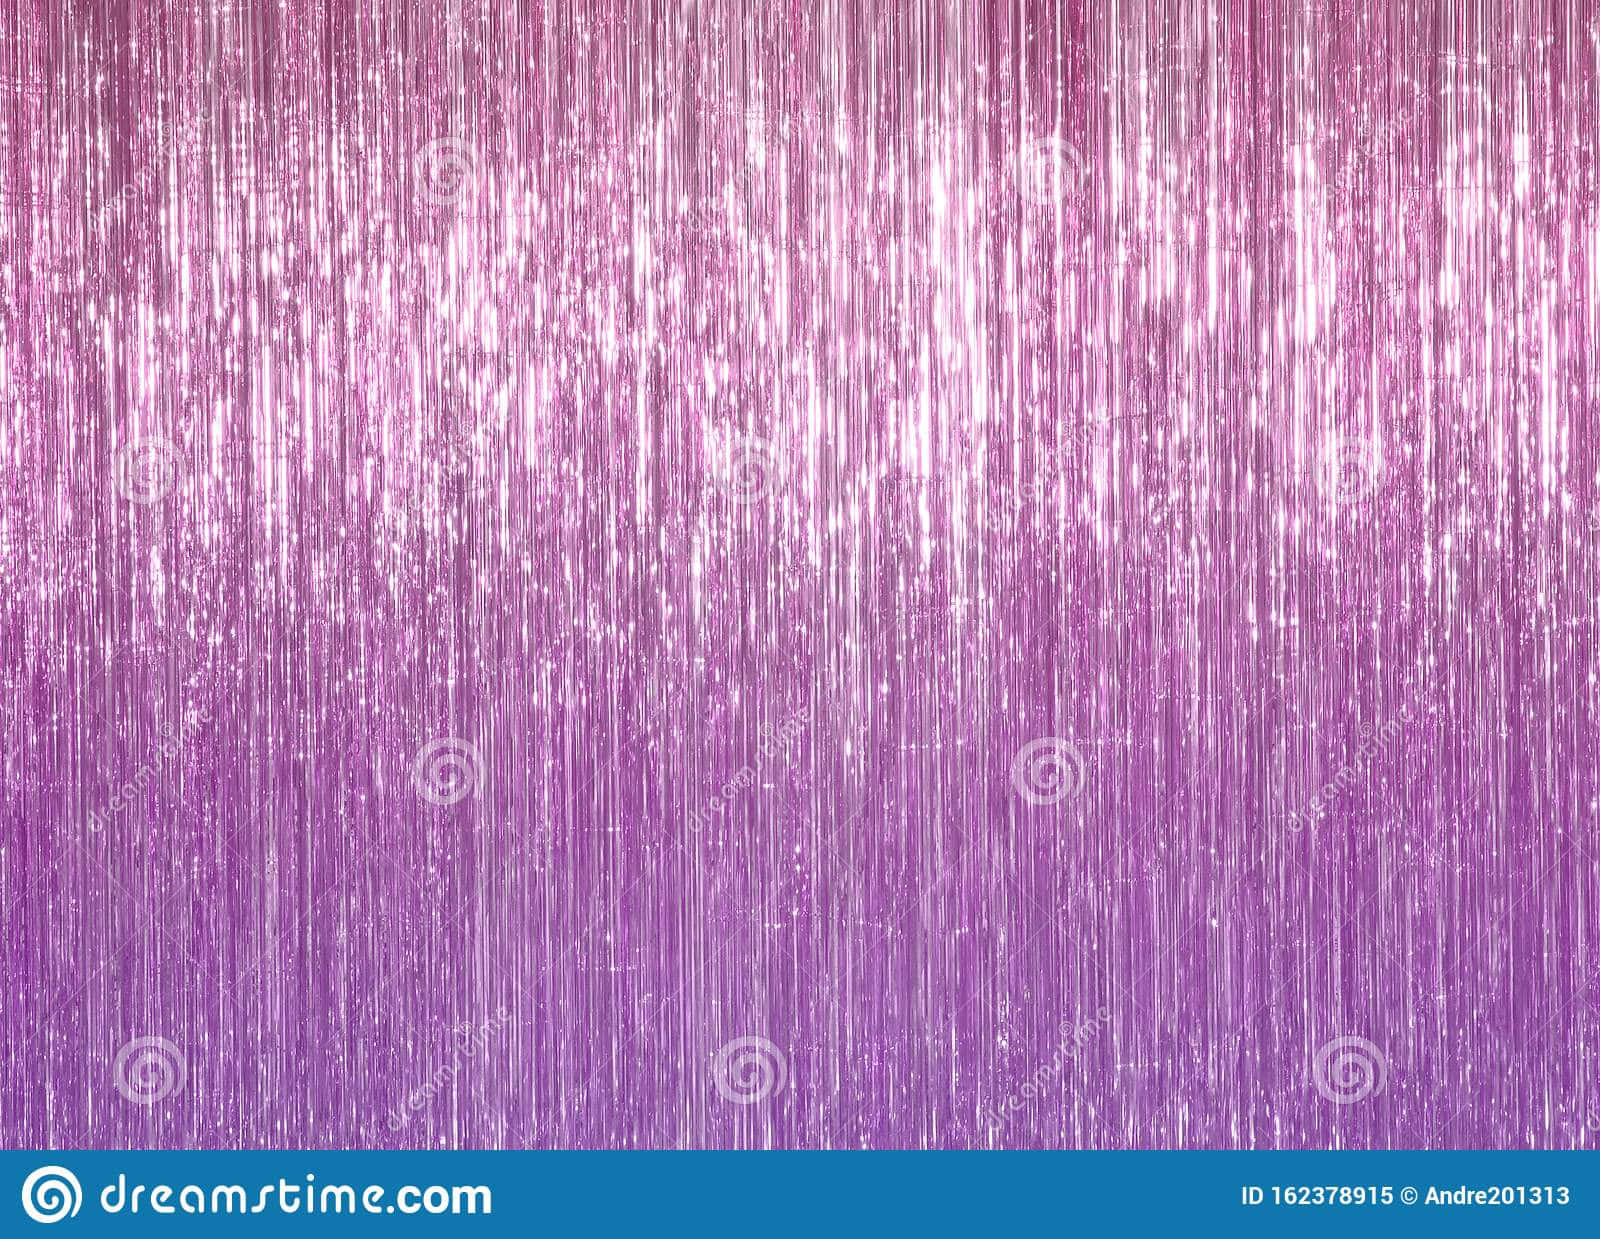 Soft tones of lilac color in a sunlit field Wallpaper